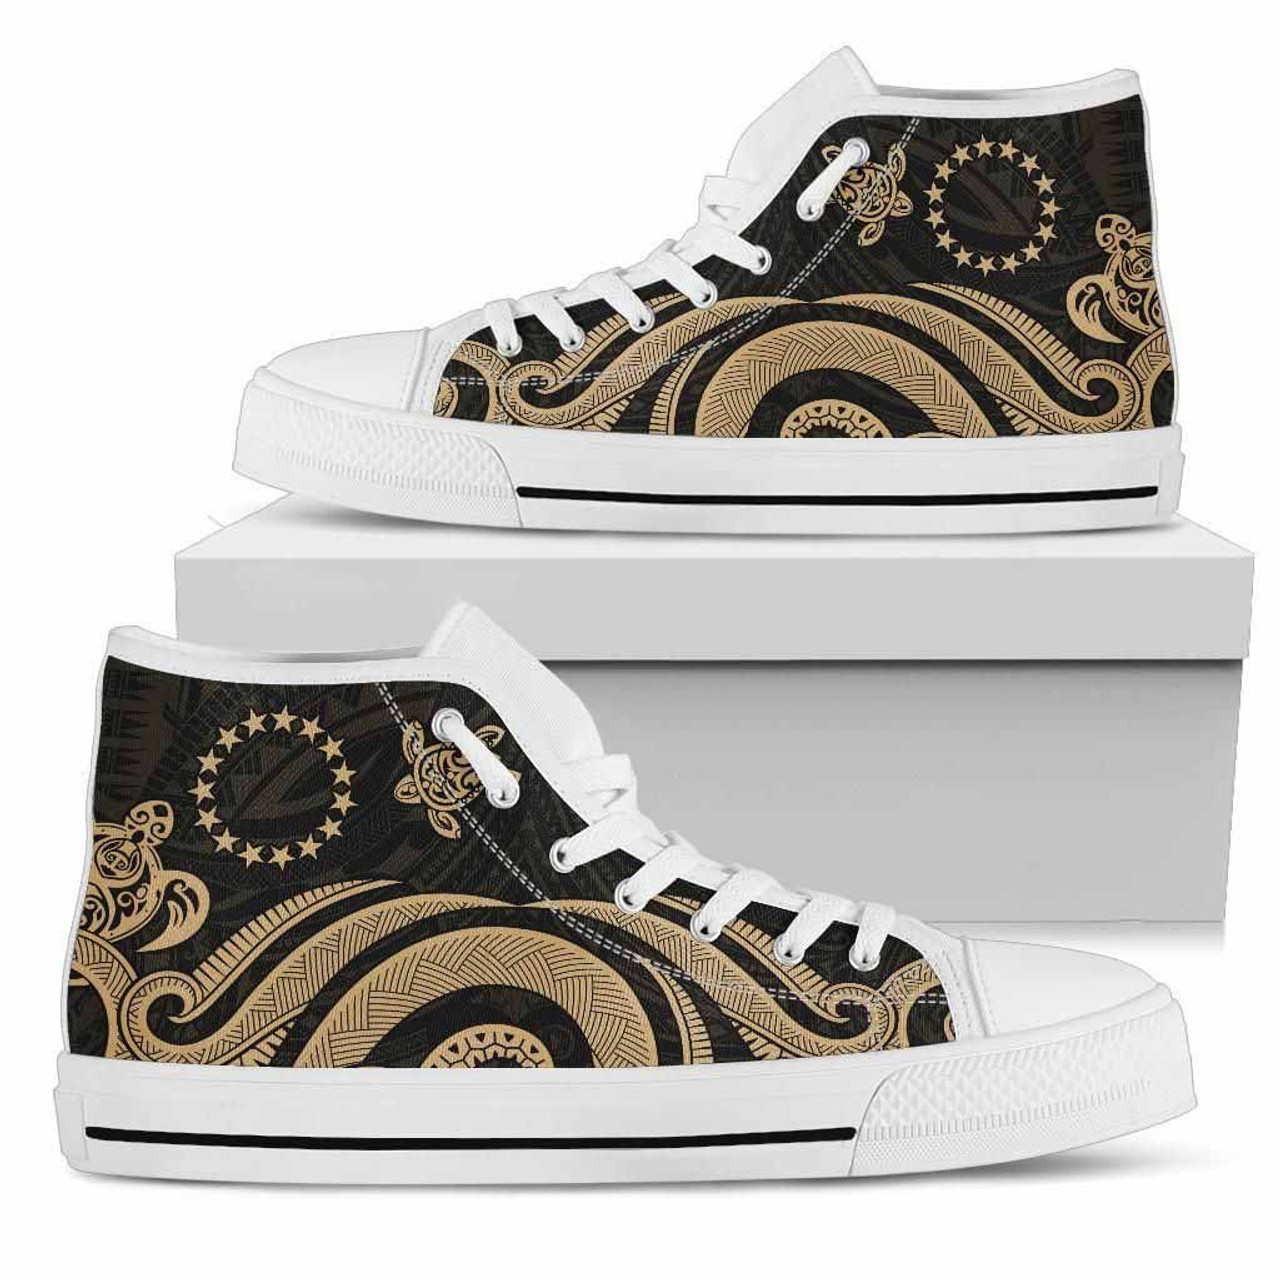 Cook Islands High Top Canvas Shoes - Gold Tentacle Turtle 6